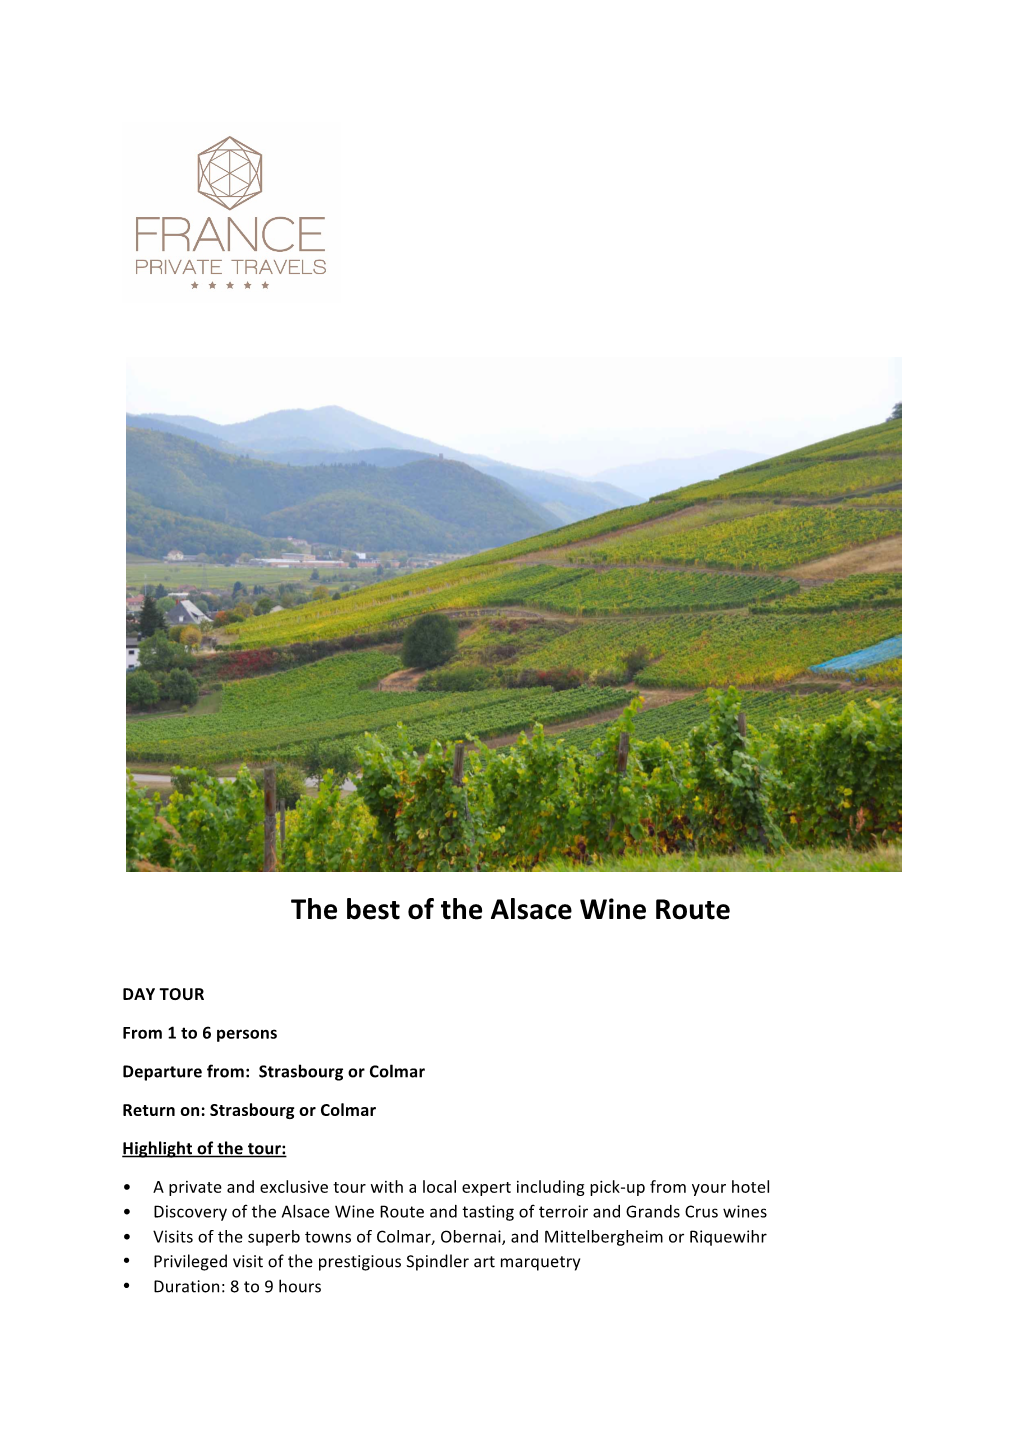 The Best of the Alsace Wine Route